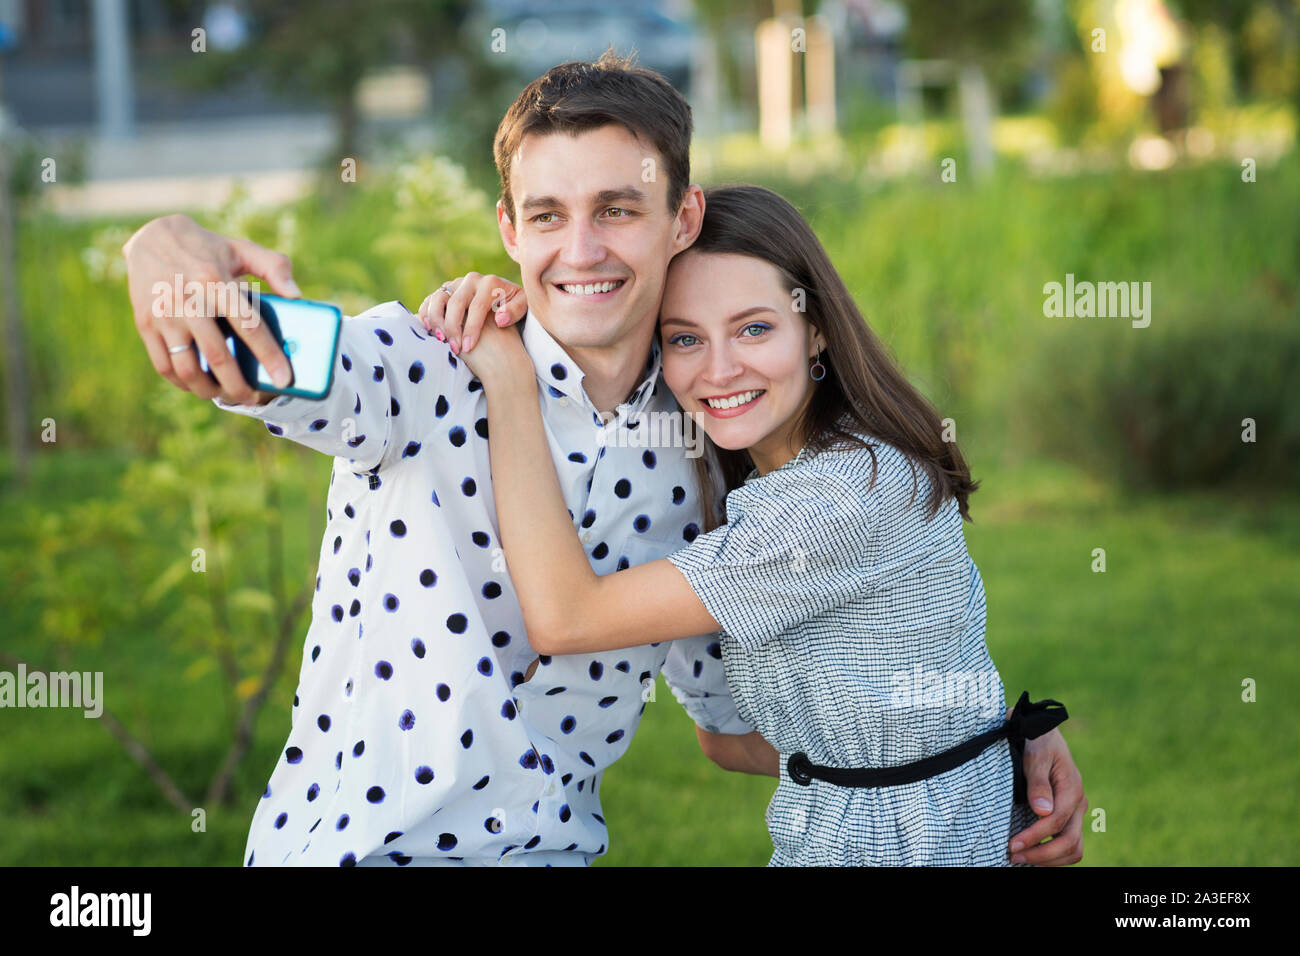 Beautiful couple in love dating outdoors and smiling. Girl persuades her boyfriend to take a picture of herself together. Selfie. Keep a moment in min Stock Photo